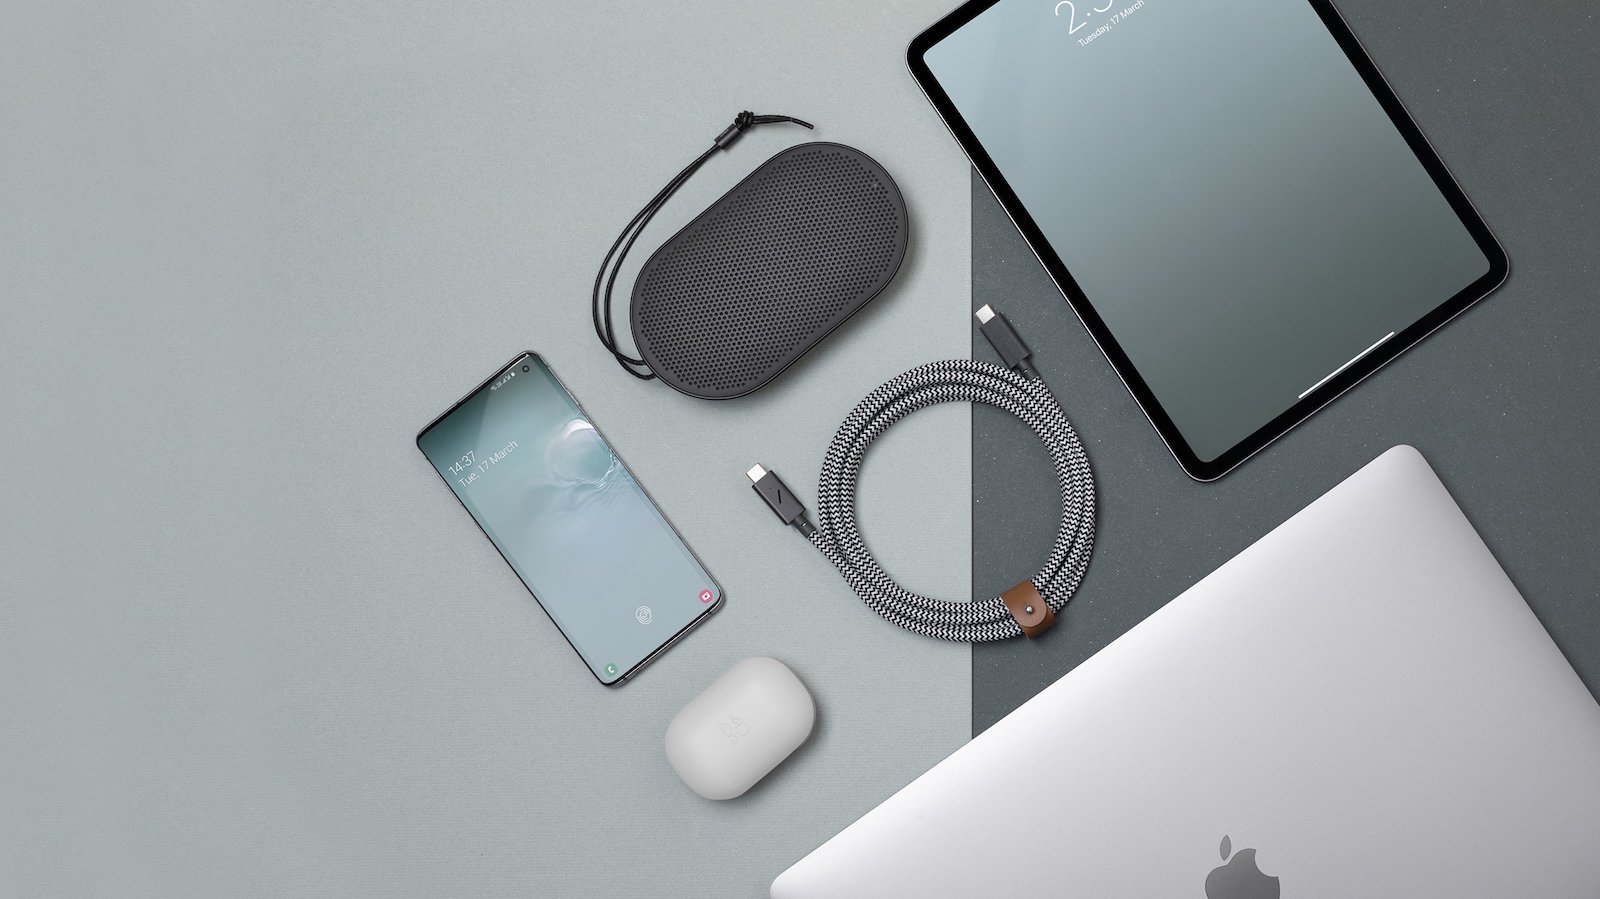 Native Union Belt Cable Pro USB-C cable supports up to 100W for faster charging